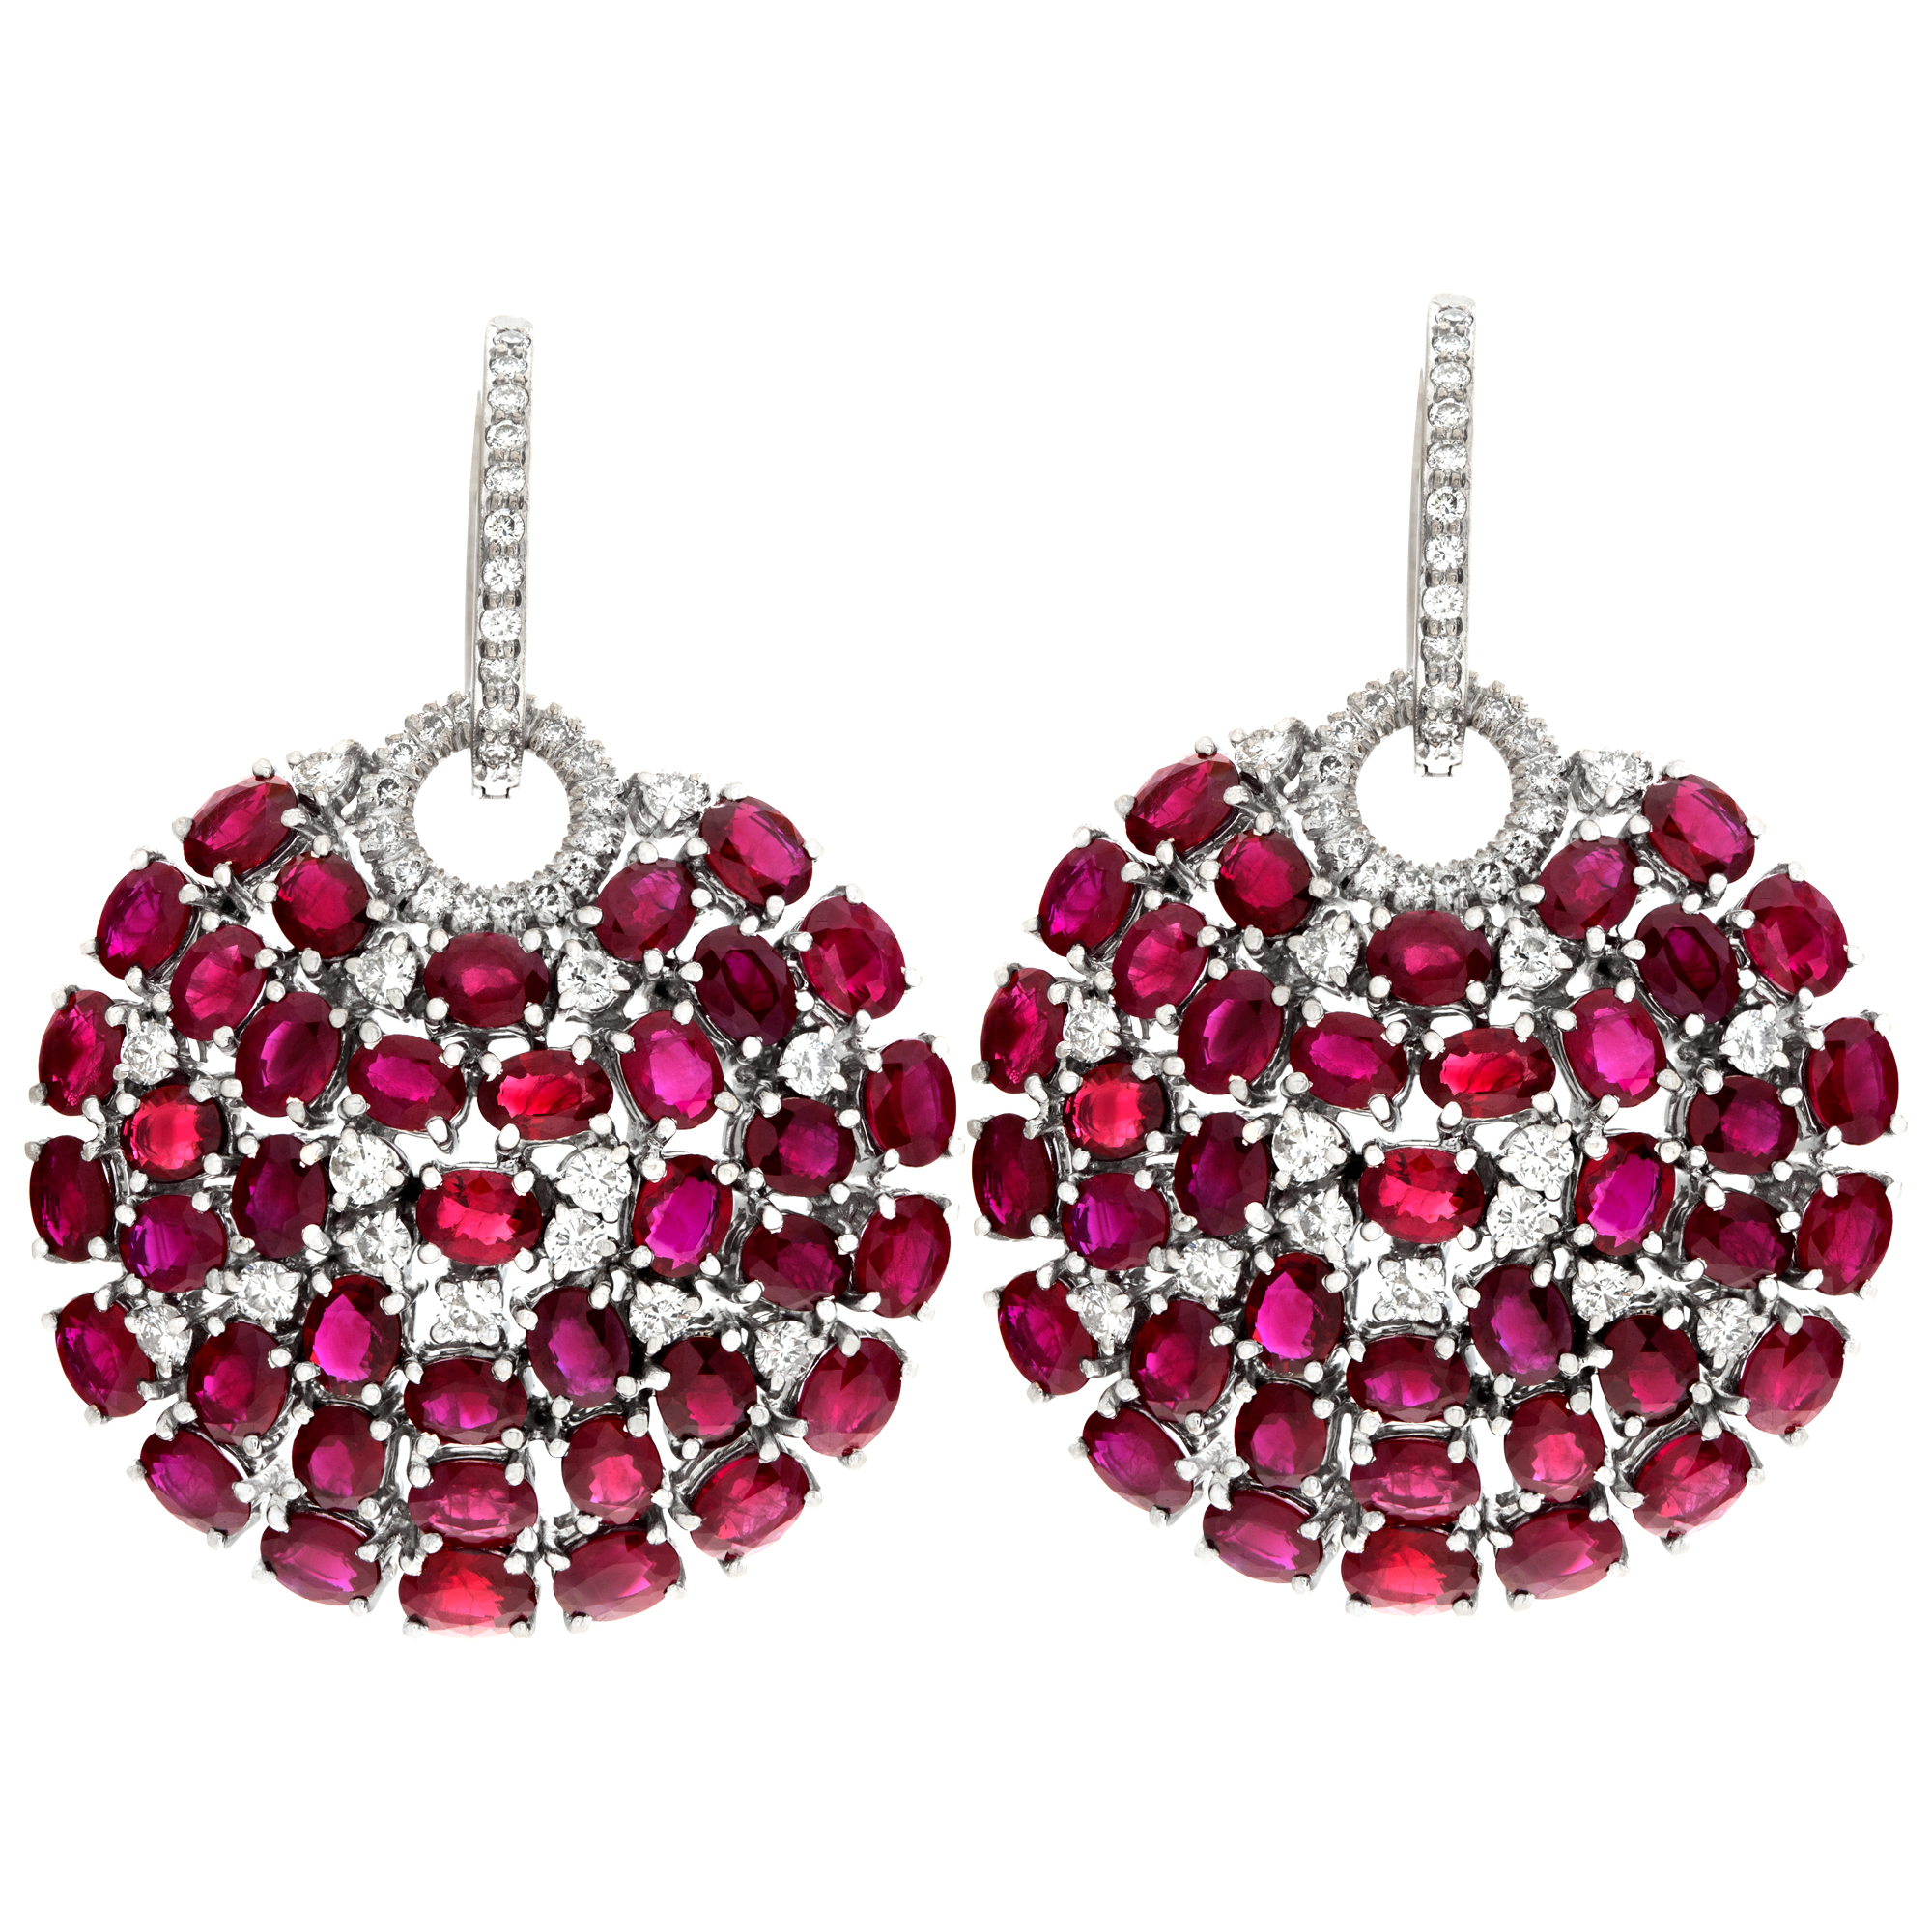 18k white gold drop earrings with 2.26 cts in diamonds and 26.13 cts in rubies image 1